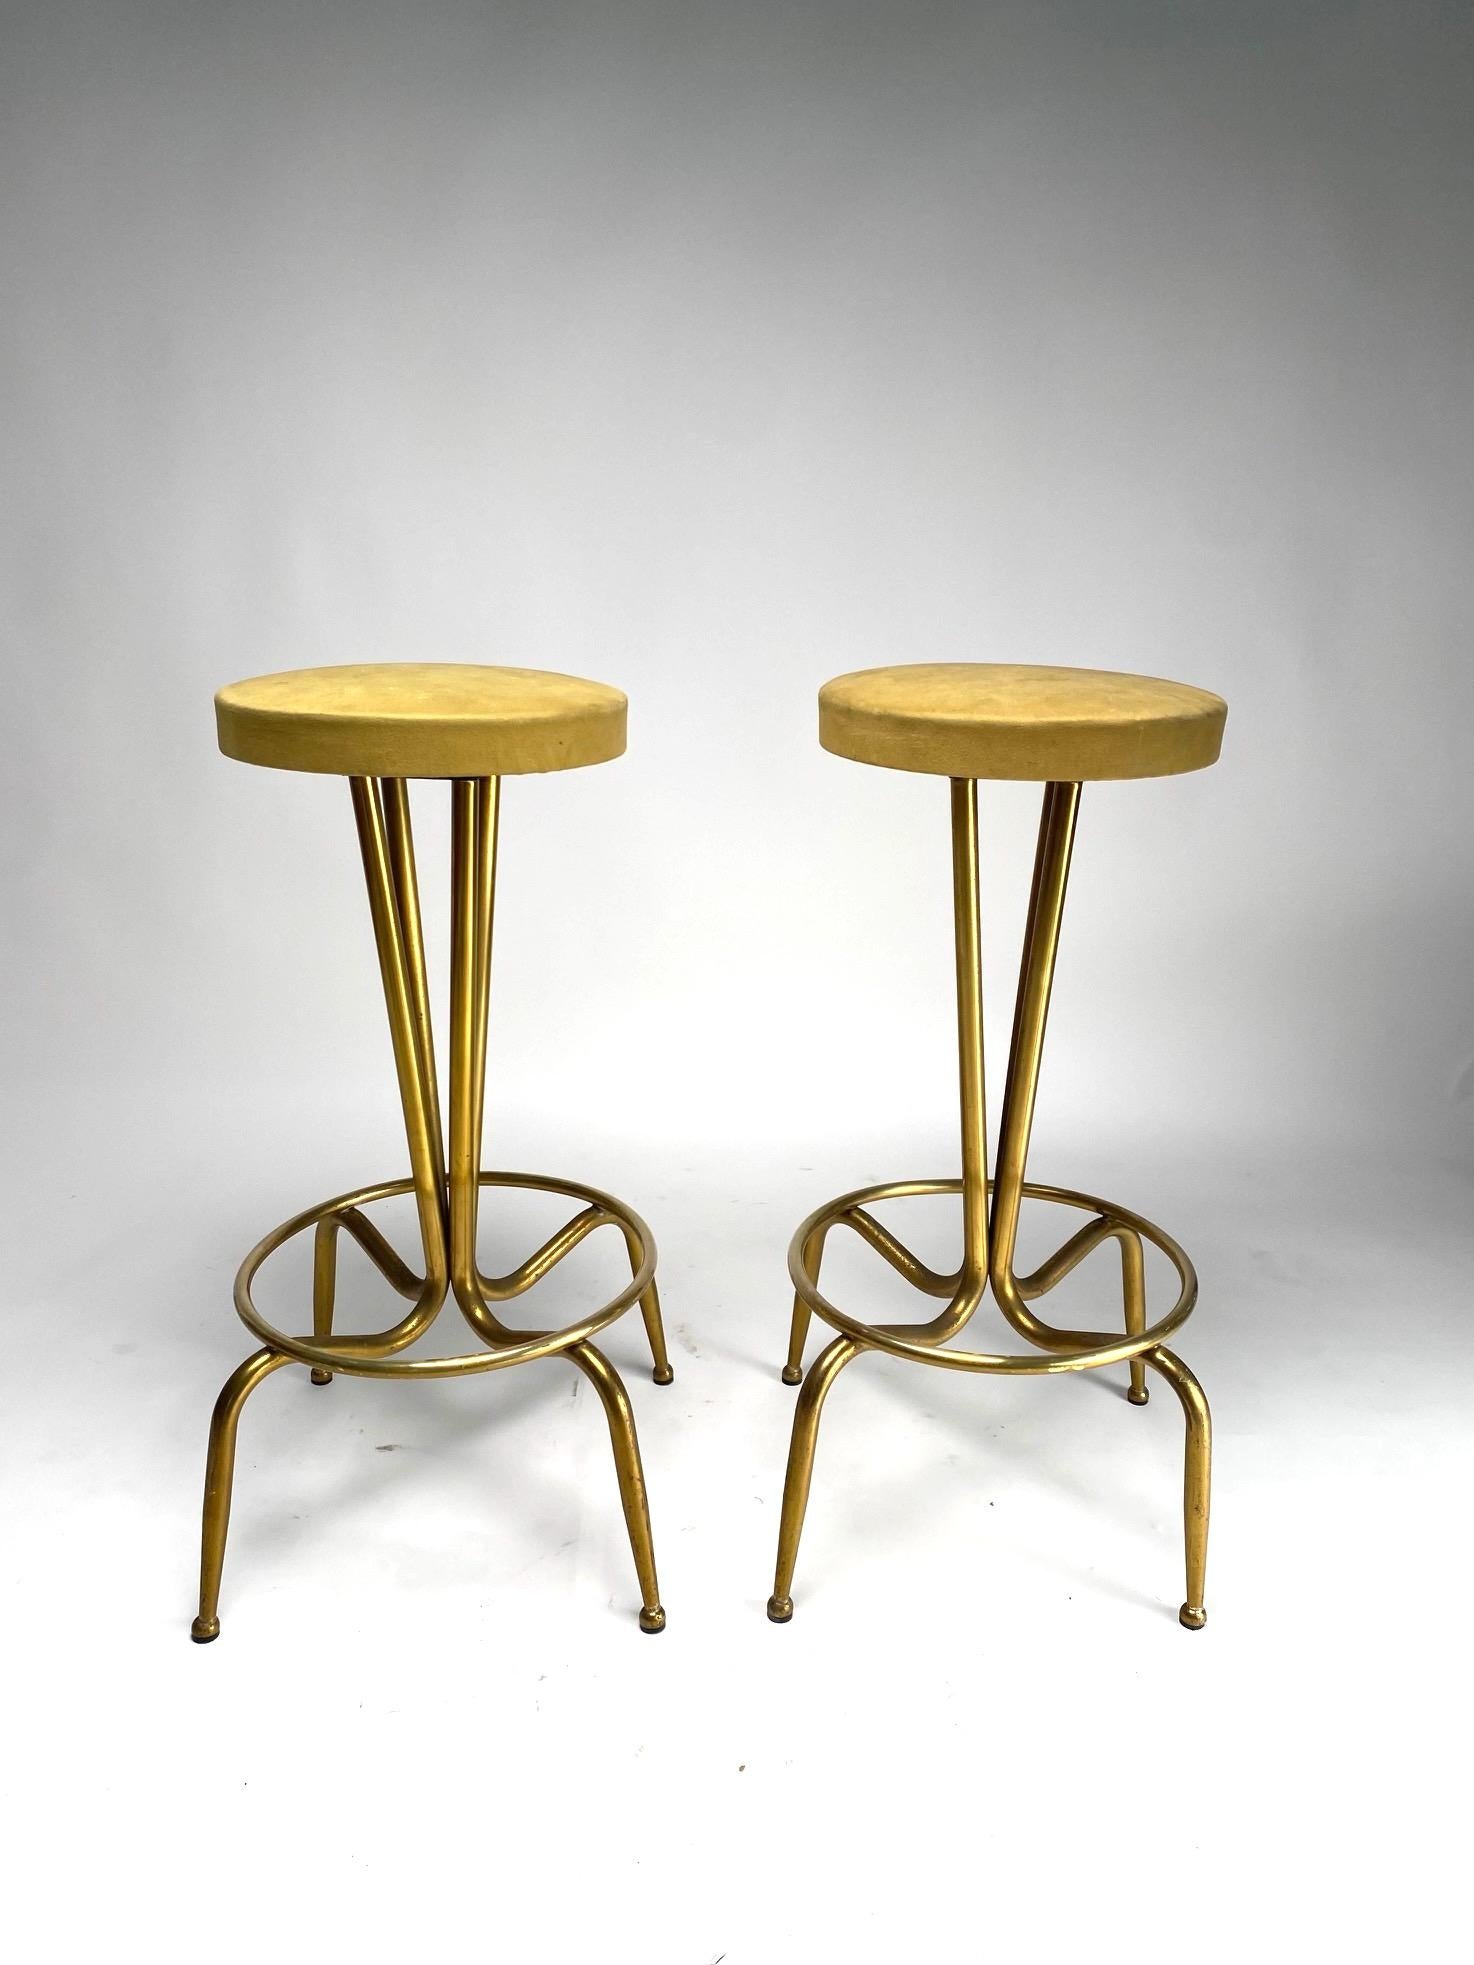 Refined pair of midcentury Italian bar stools, brass structure and original fabric. 1950s

A pair of organic stools of great executive quality, coming from an important house in the heart of the old city of Bologna (Italy)

We preferred to keep the